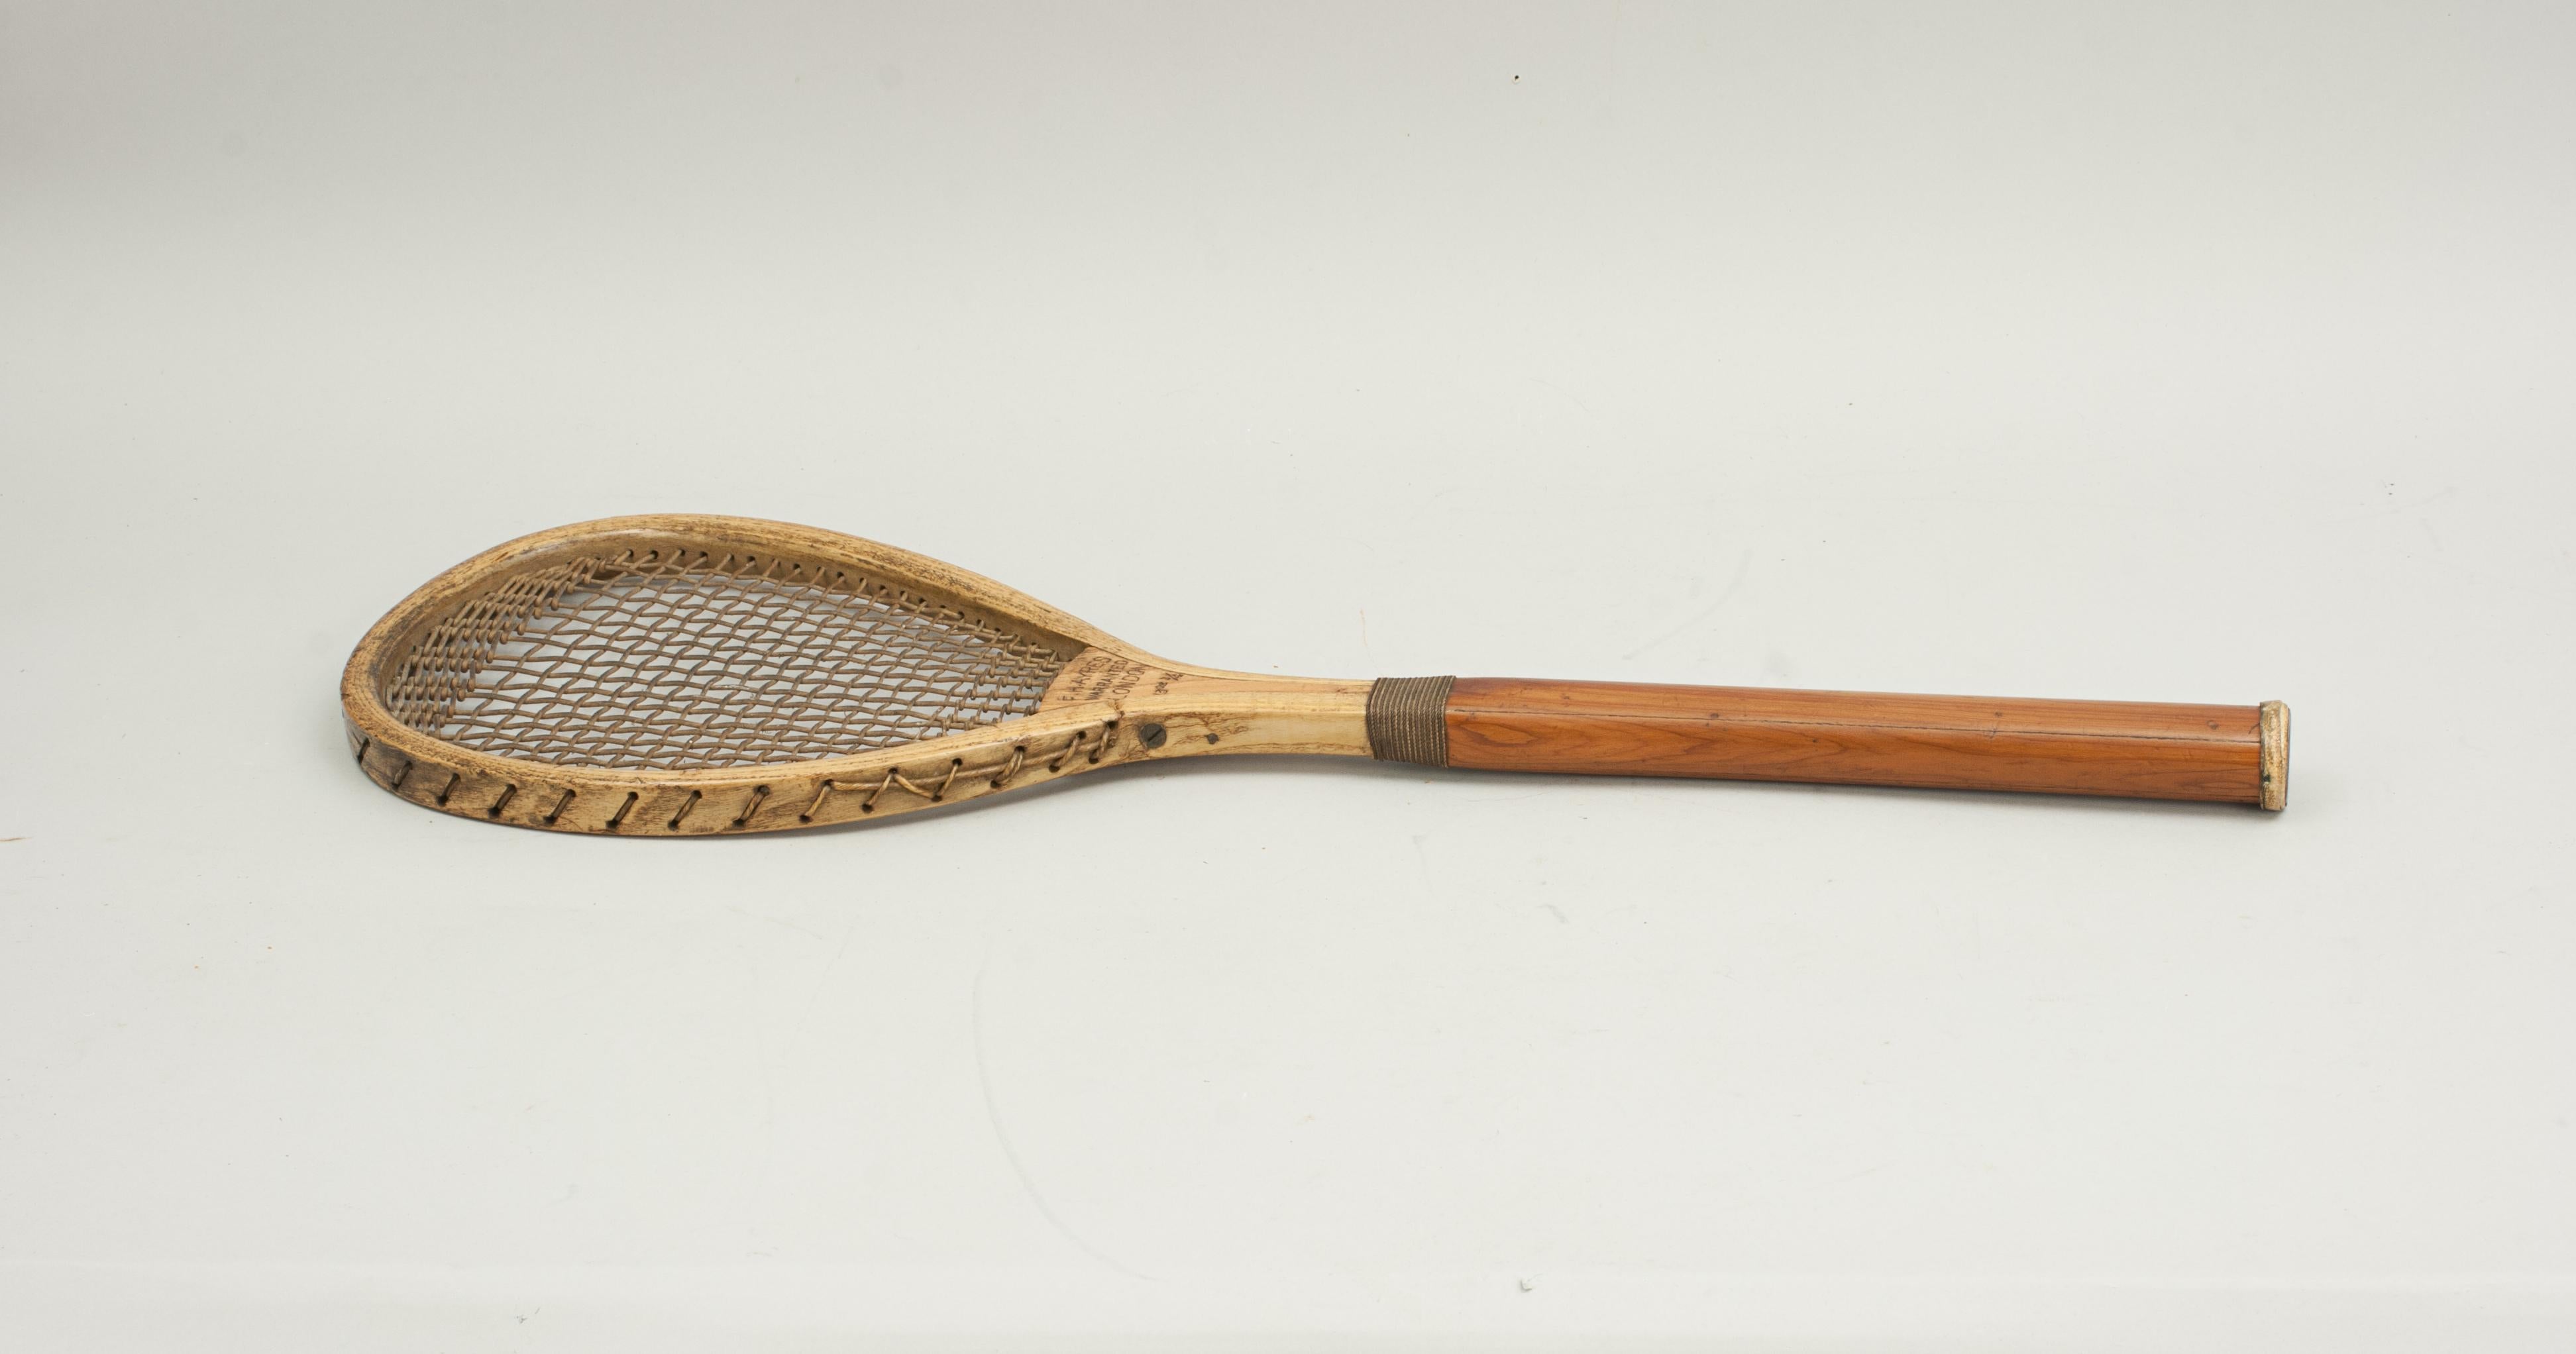 Antique F.H. Ayres Lawn Tennis Racket.
A rare, early lopsided (tilt head or teardrop shape) lawn tennis racquet in good original condition by F.H. Ayres of London. The heavy ash lop-sided frame is in very good condition, the wedge with slight